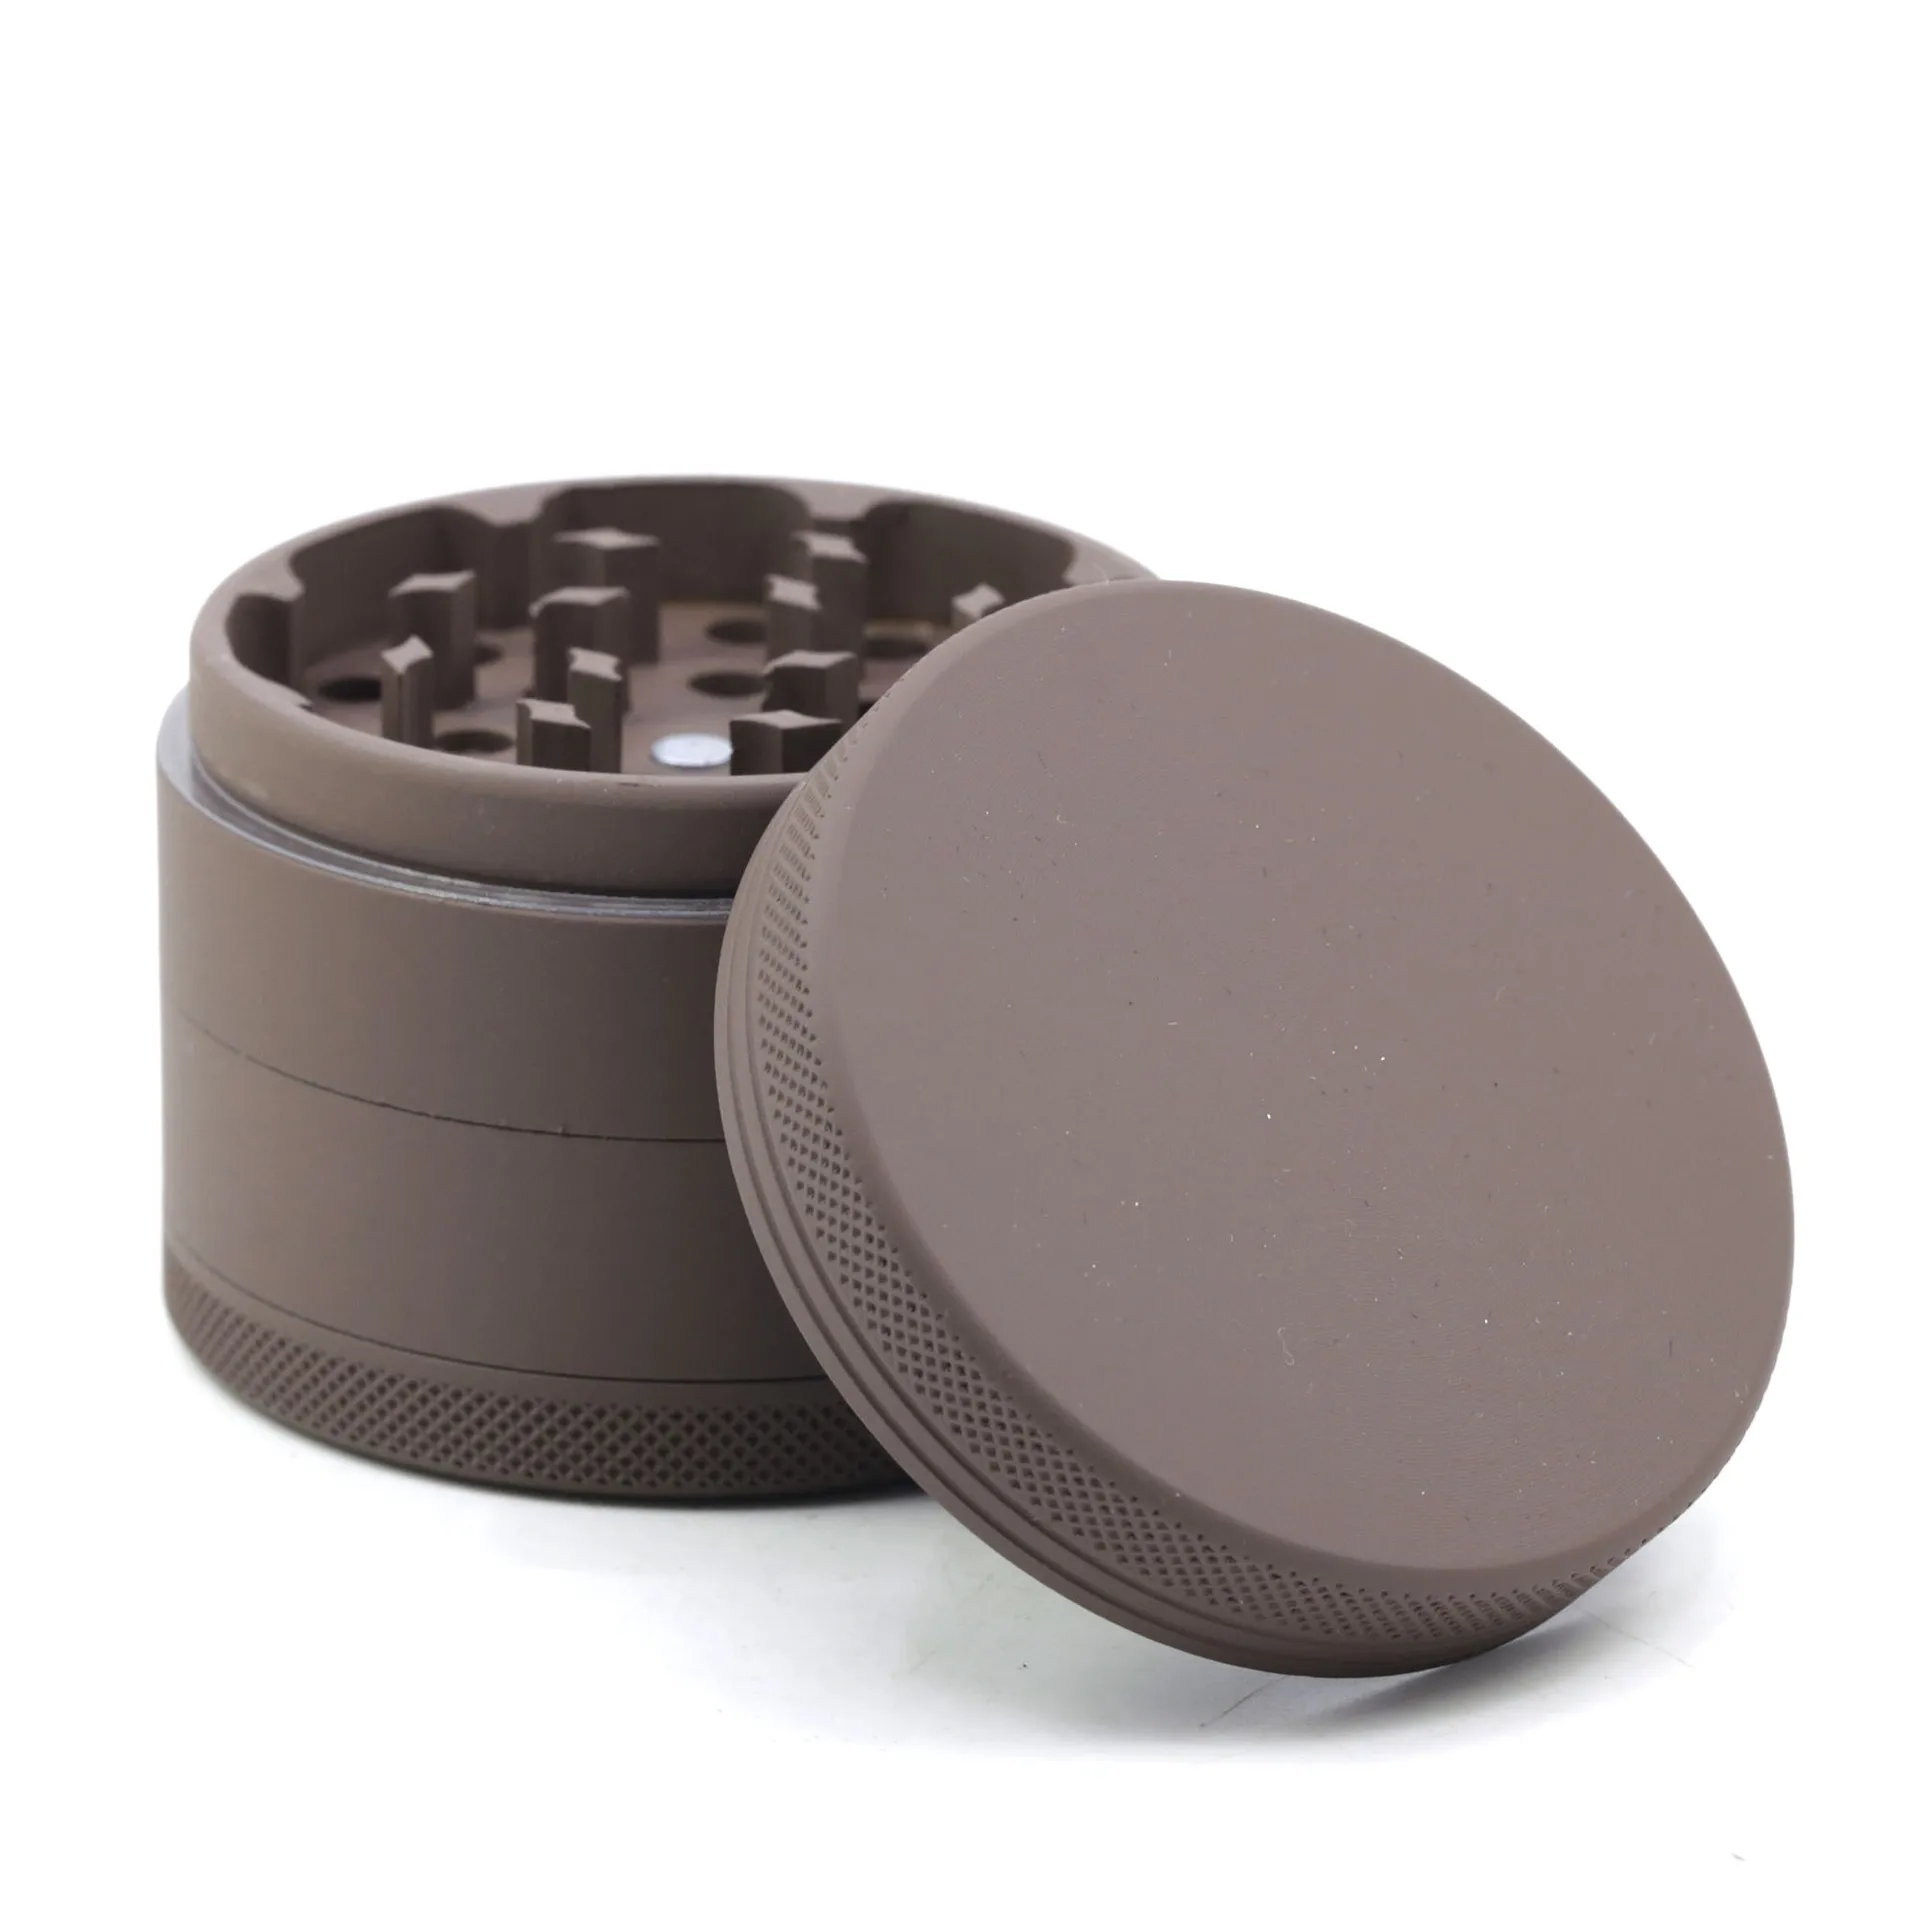 4-piece 2.5 inches Aluminum white color herb grinder weed